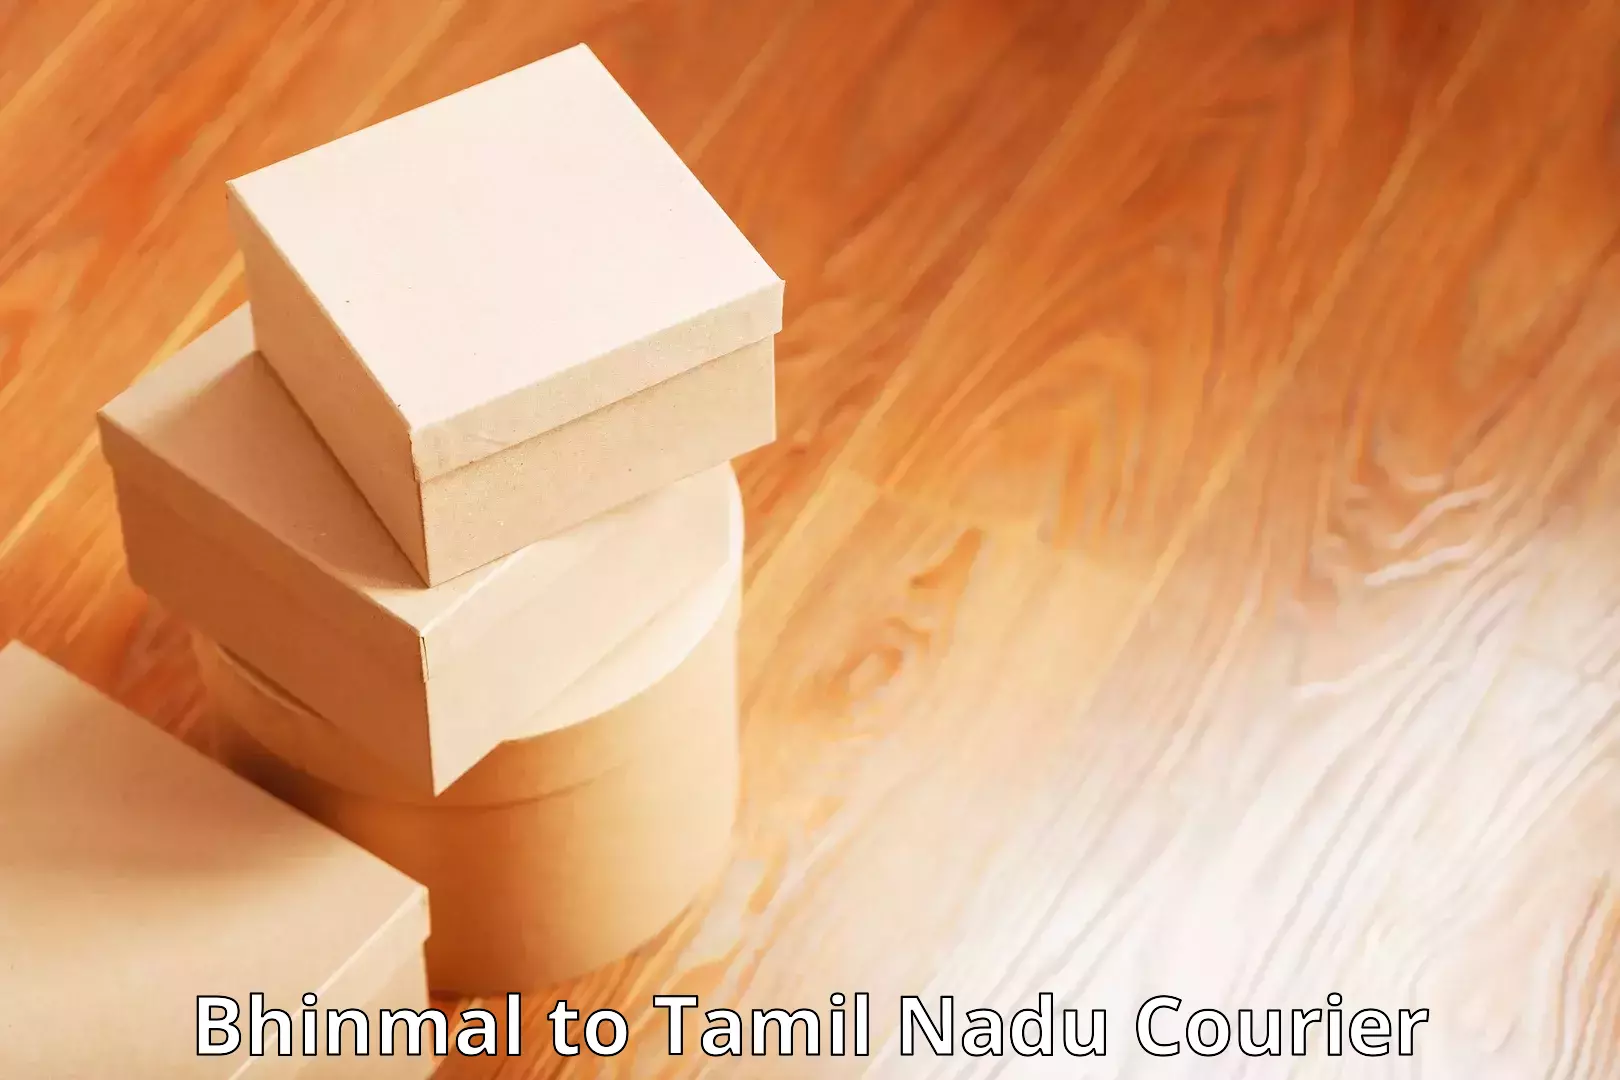 Tailored delivery services Bhinmal to Tamil Nadu